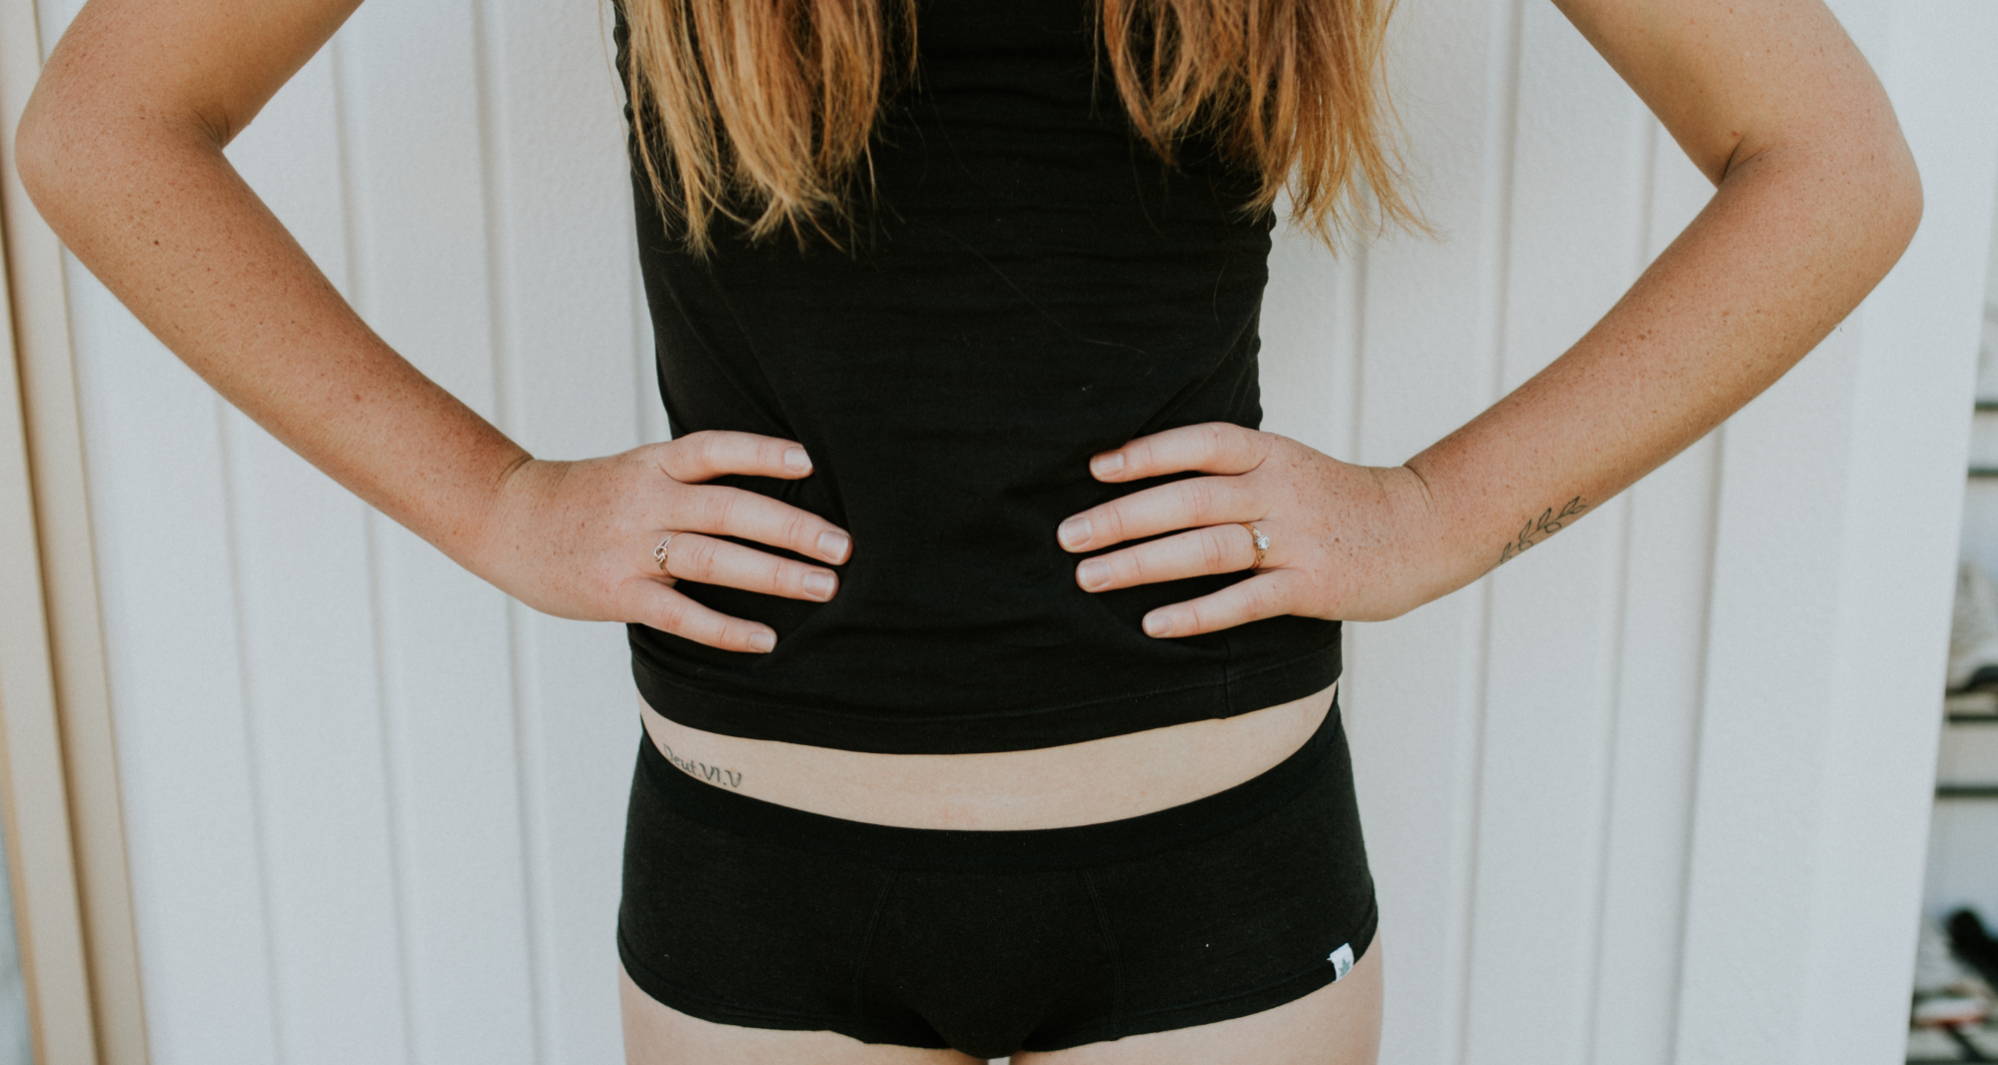 Chub Rub: What Causes It And 11 Ways To Prevent It – WAMA Underwear